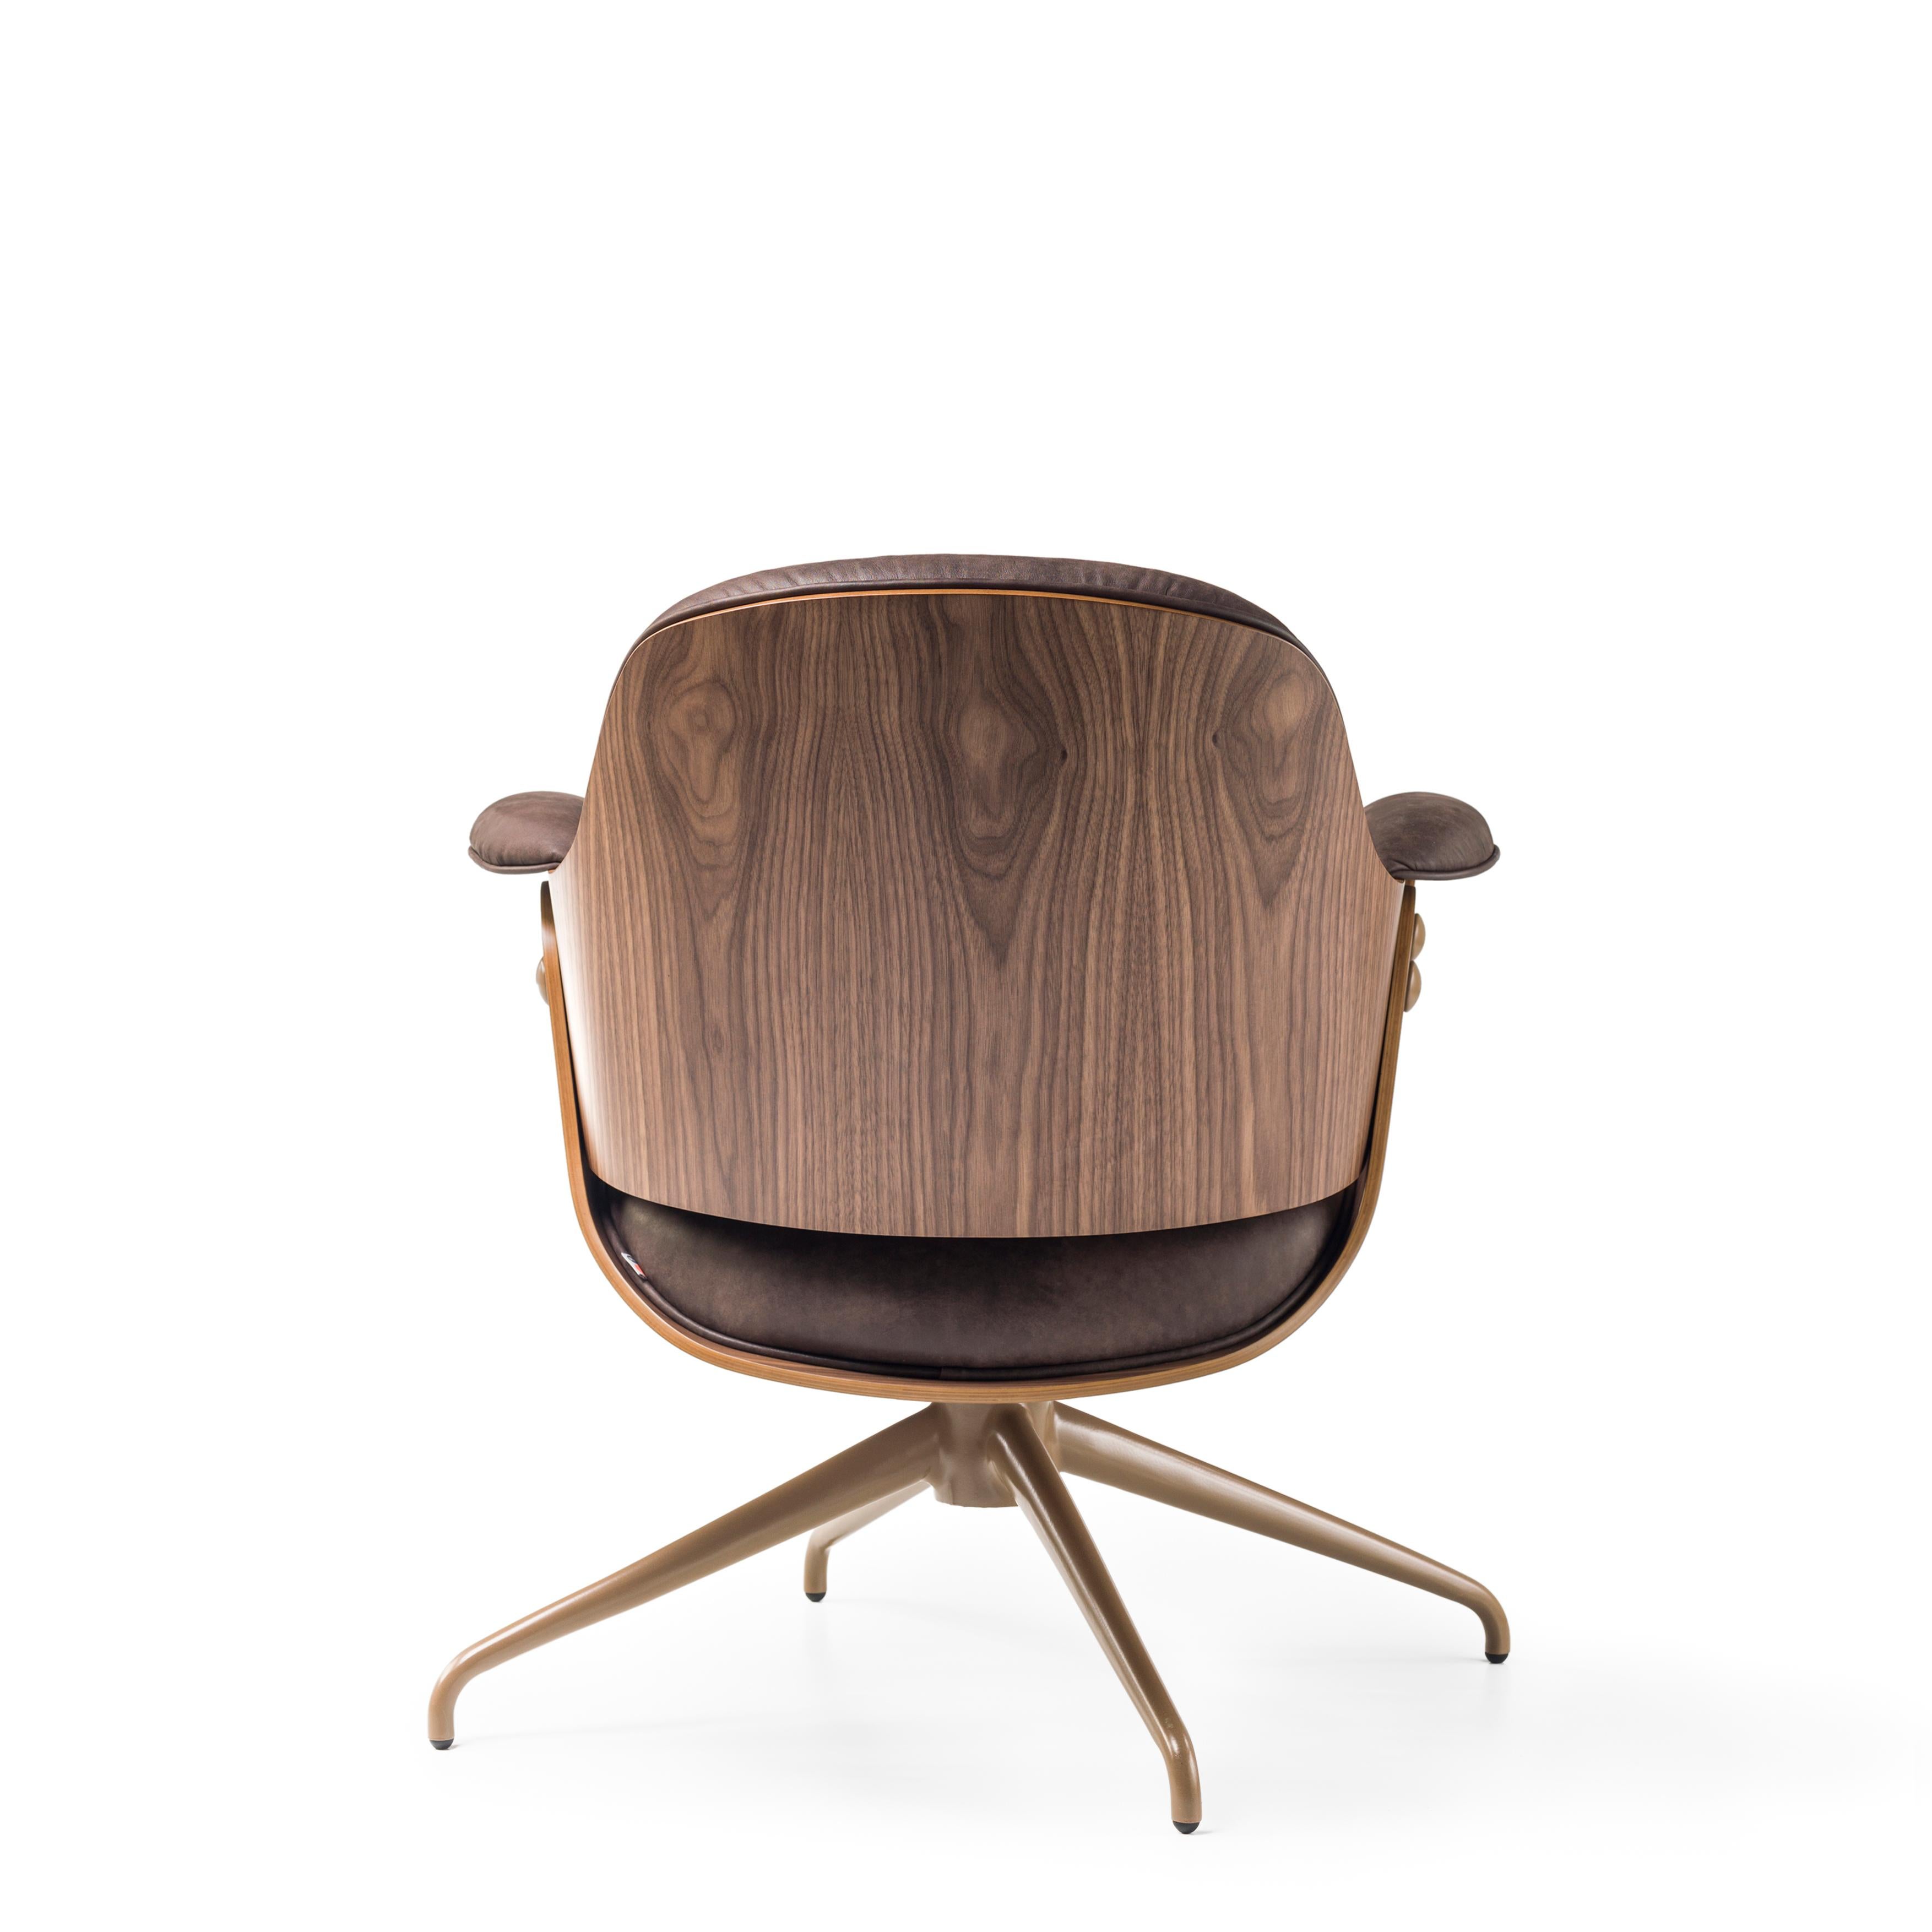 Modern Jaime Hayon, Contemporary, Plywood Walnut Leather Low Lounger Armchair